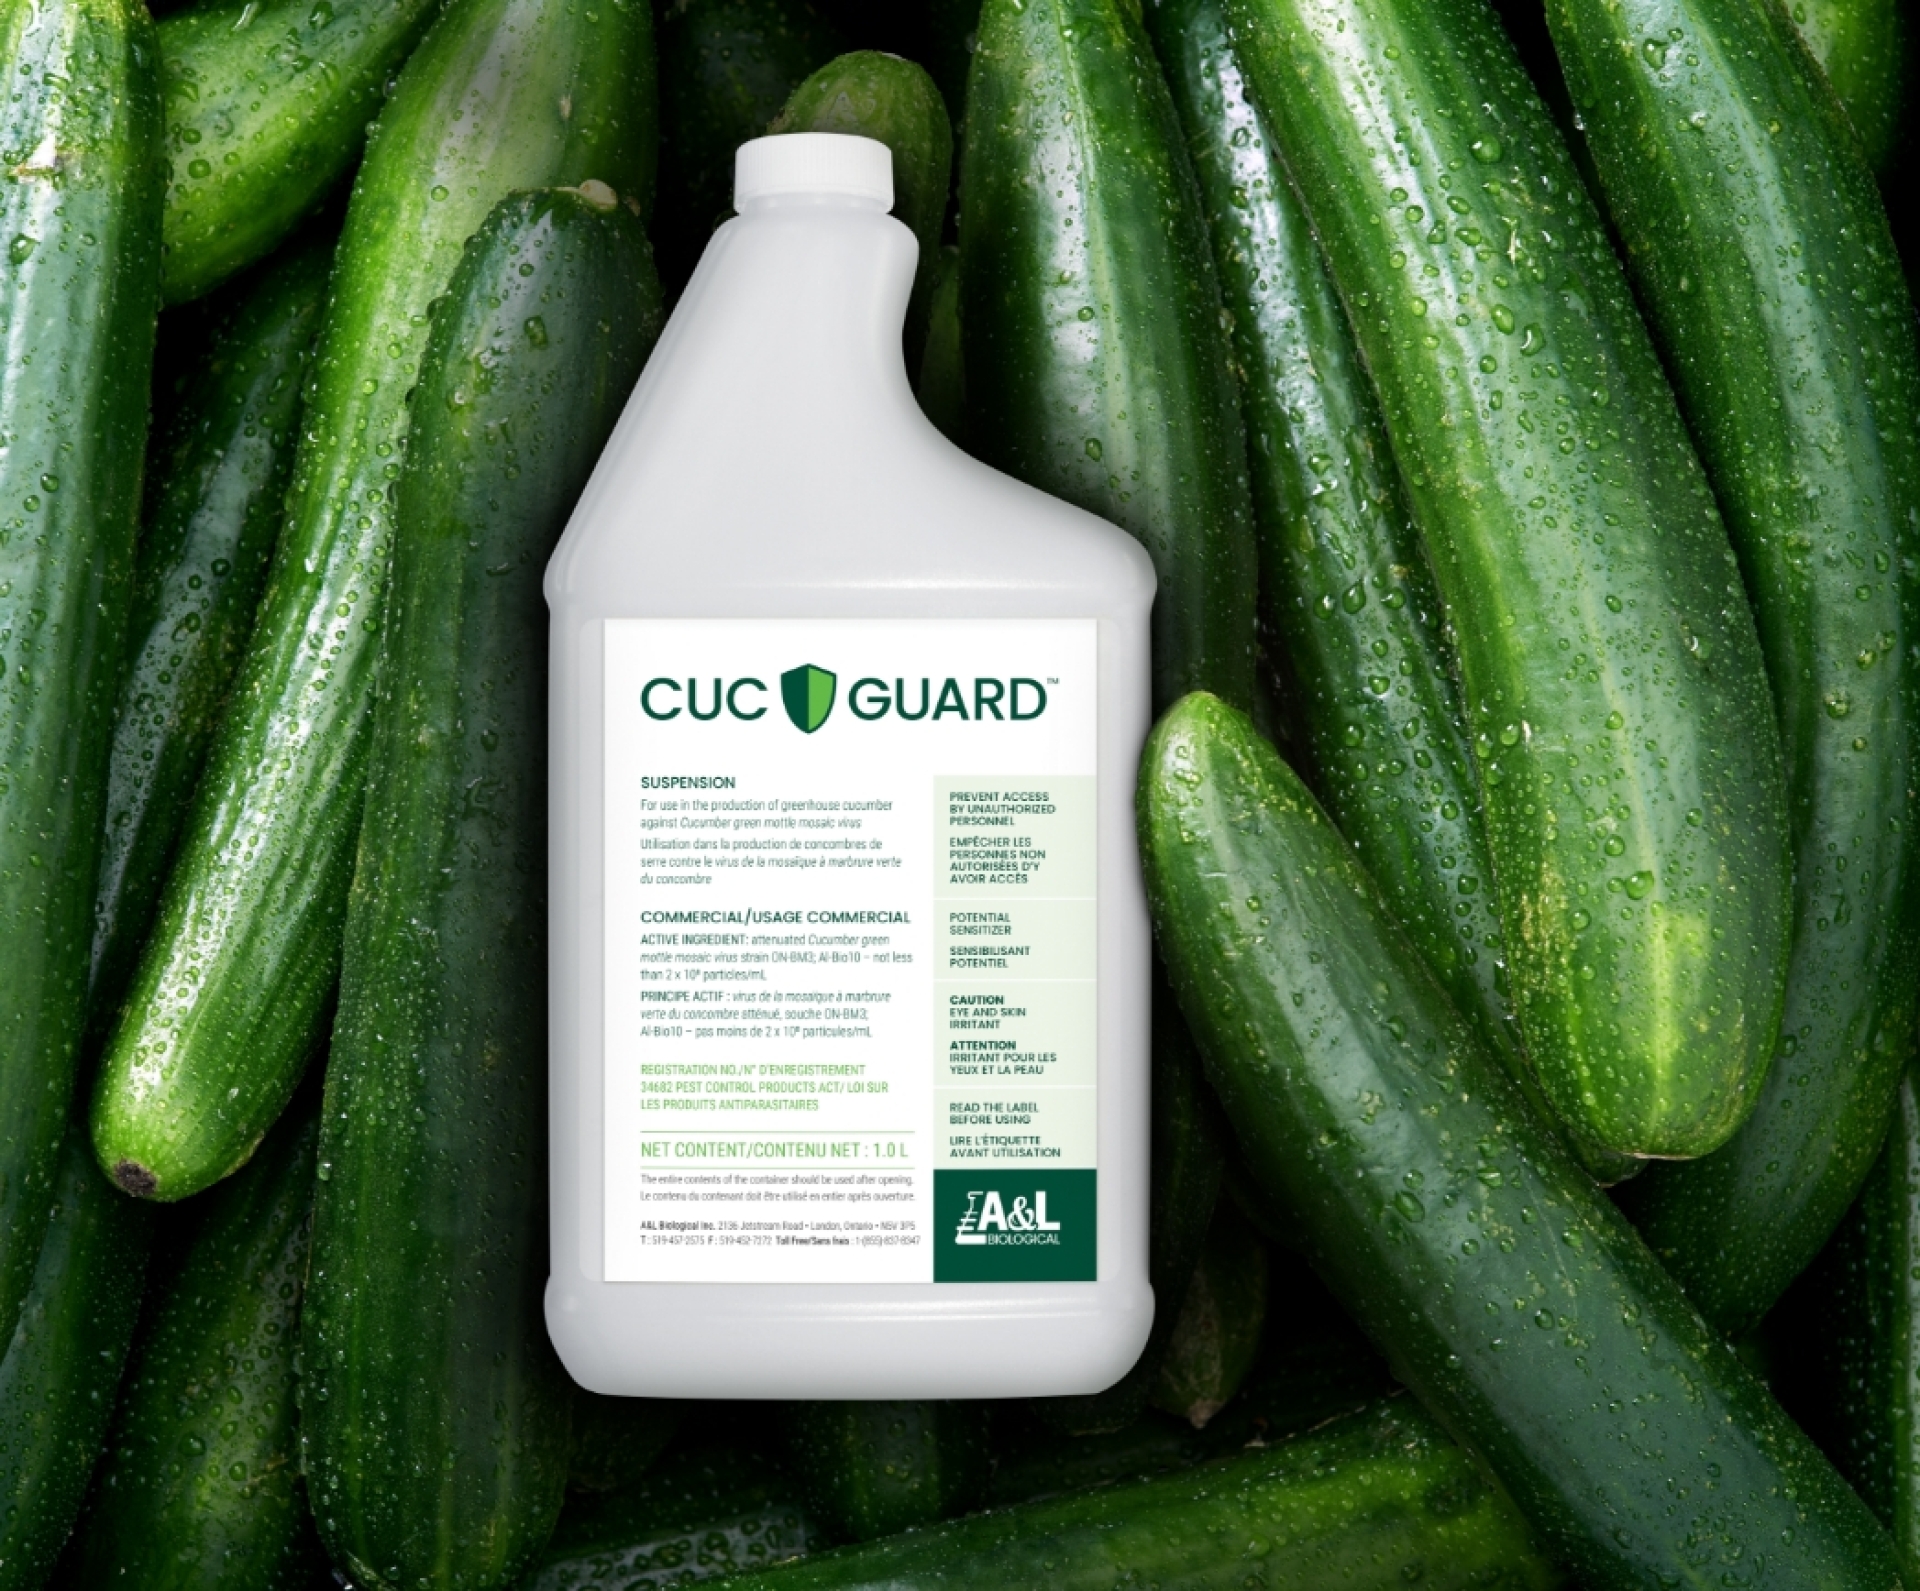 Package design for a Cuc-Guard bottle shown among a bunch of cucumbers